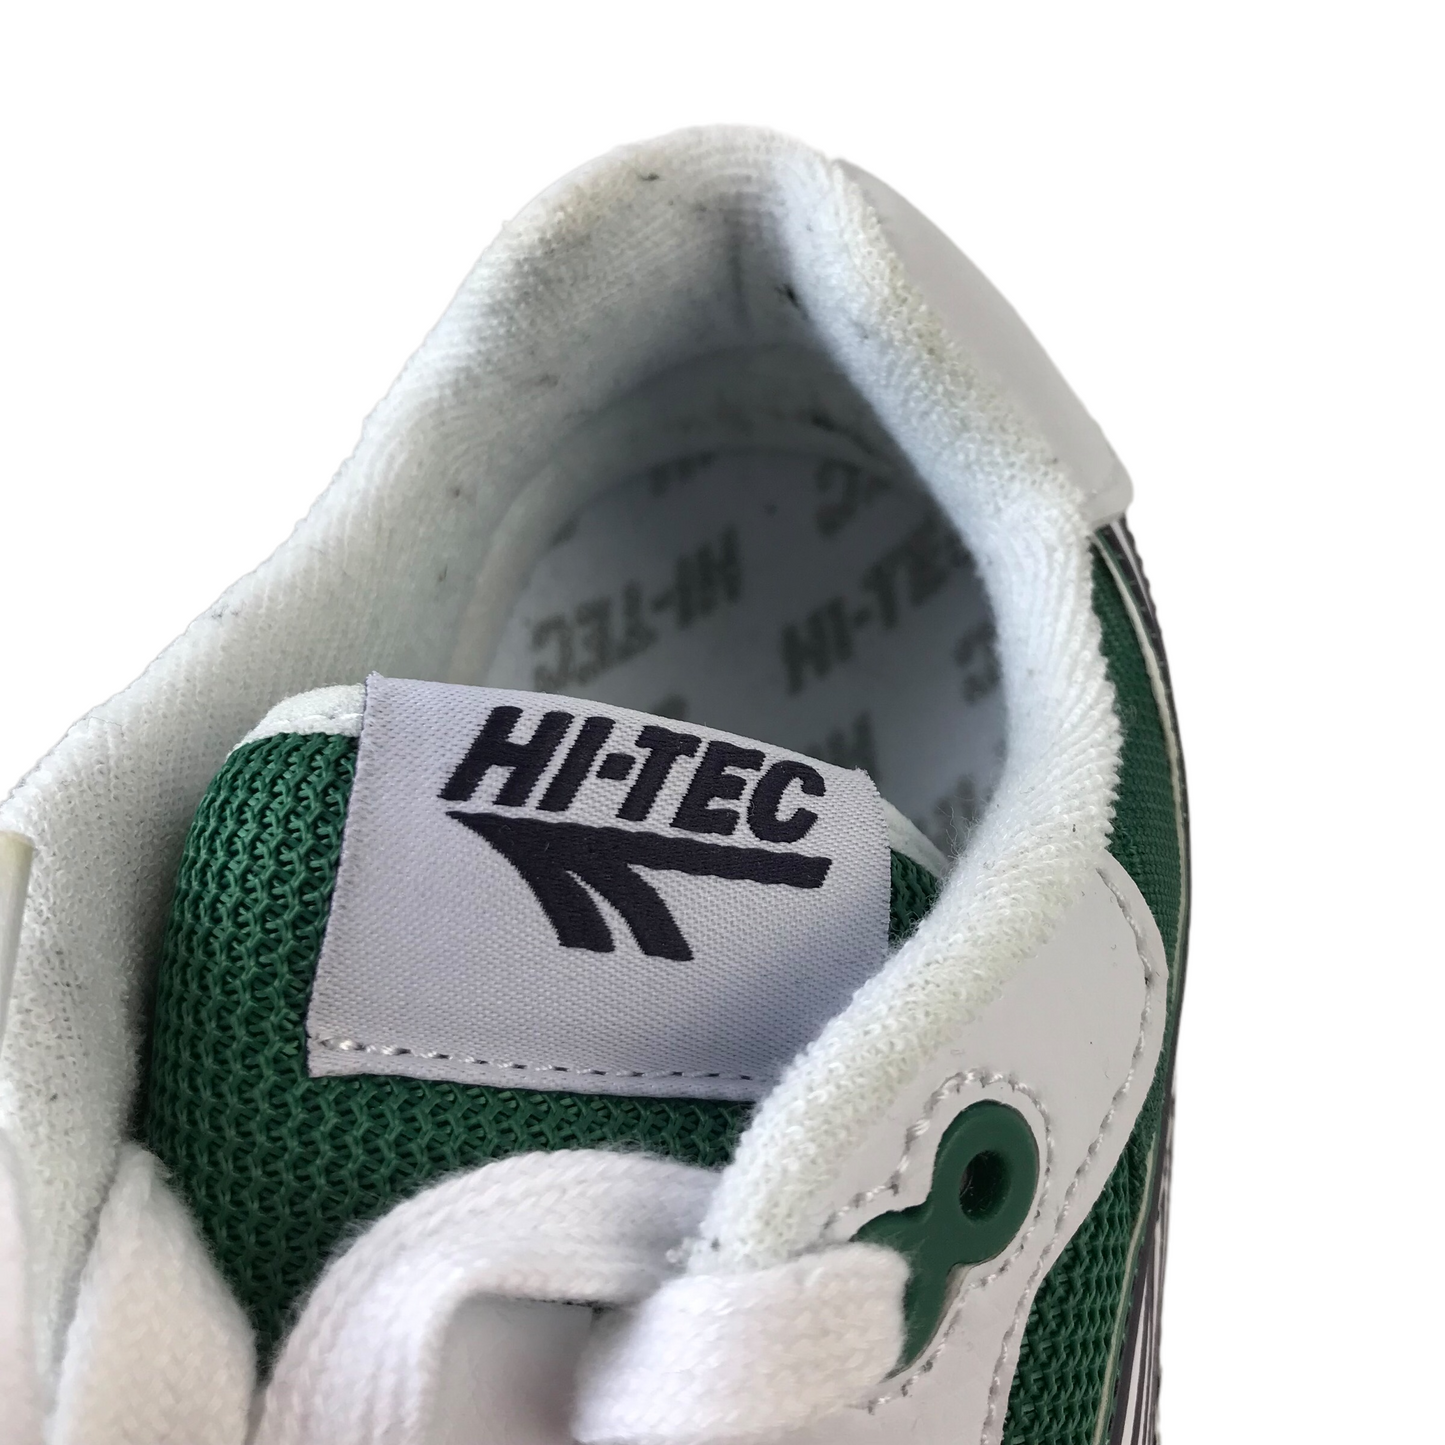 Hi-Tech BW-146 Green and White Trainers Size UK 7